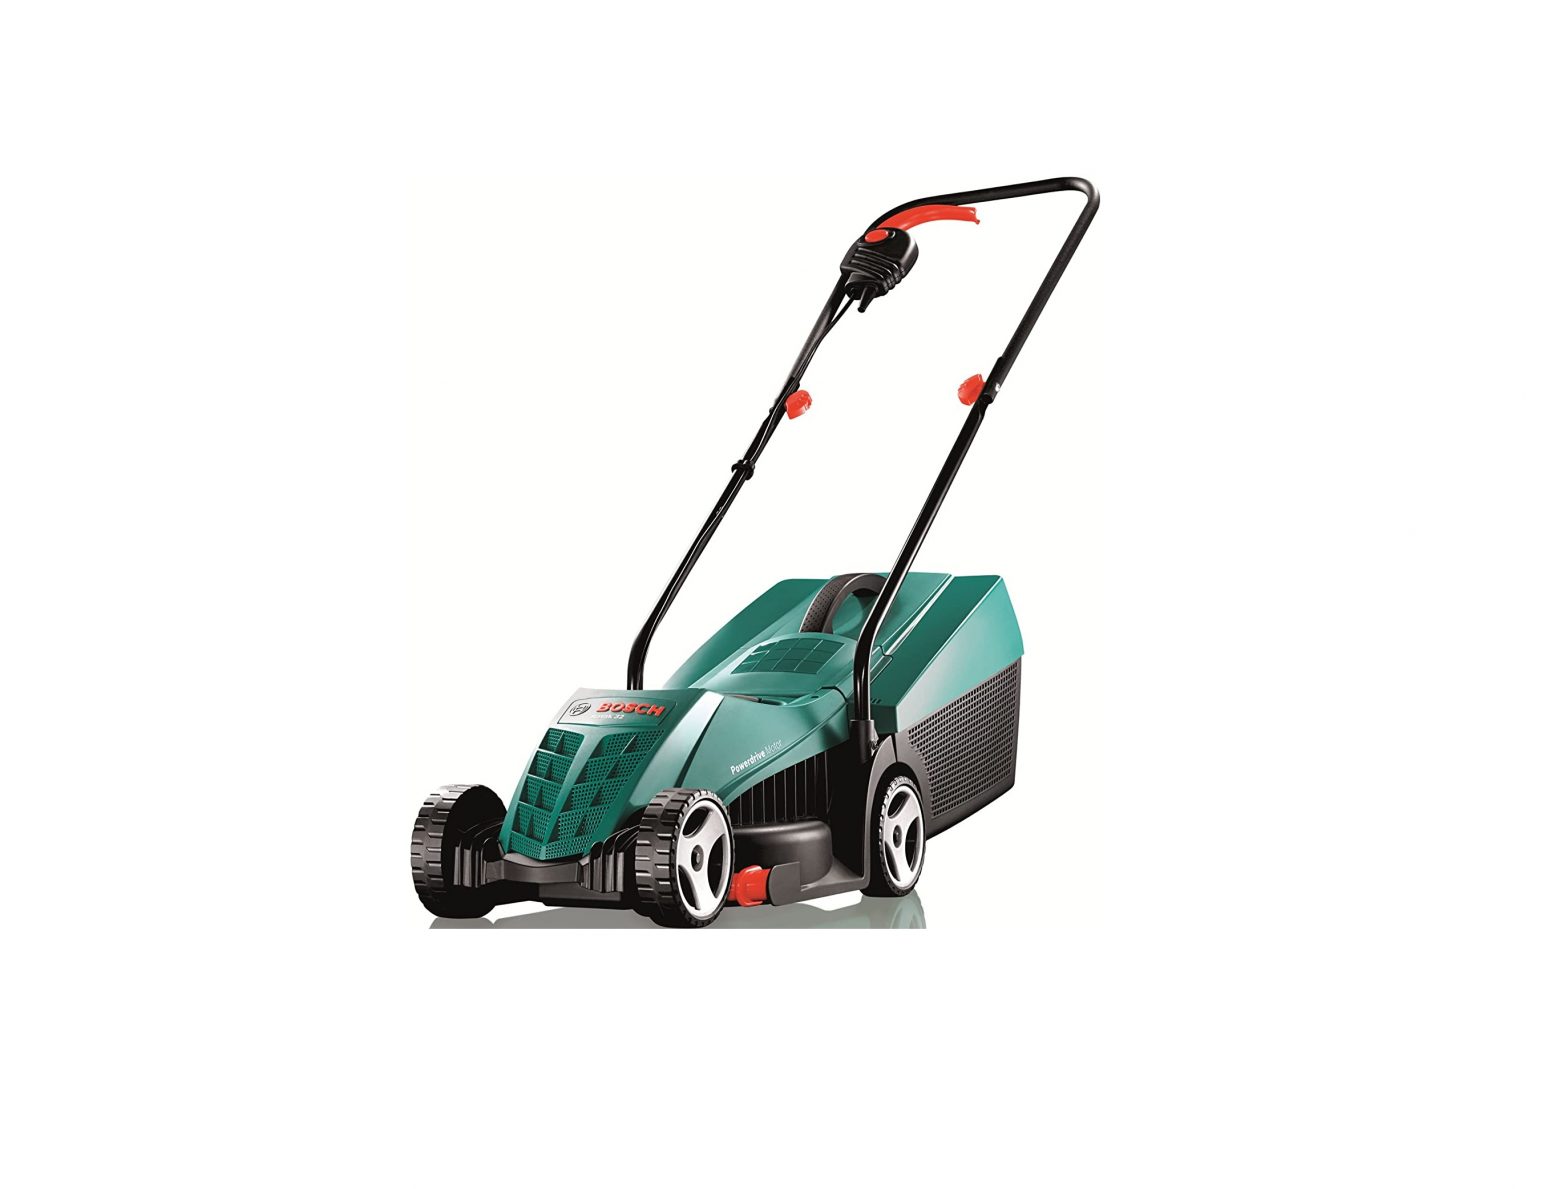 BOSCH Electric Rotary Lawnmower Instruction Manual